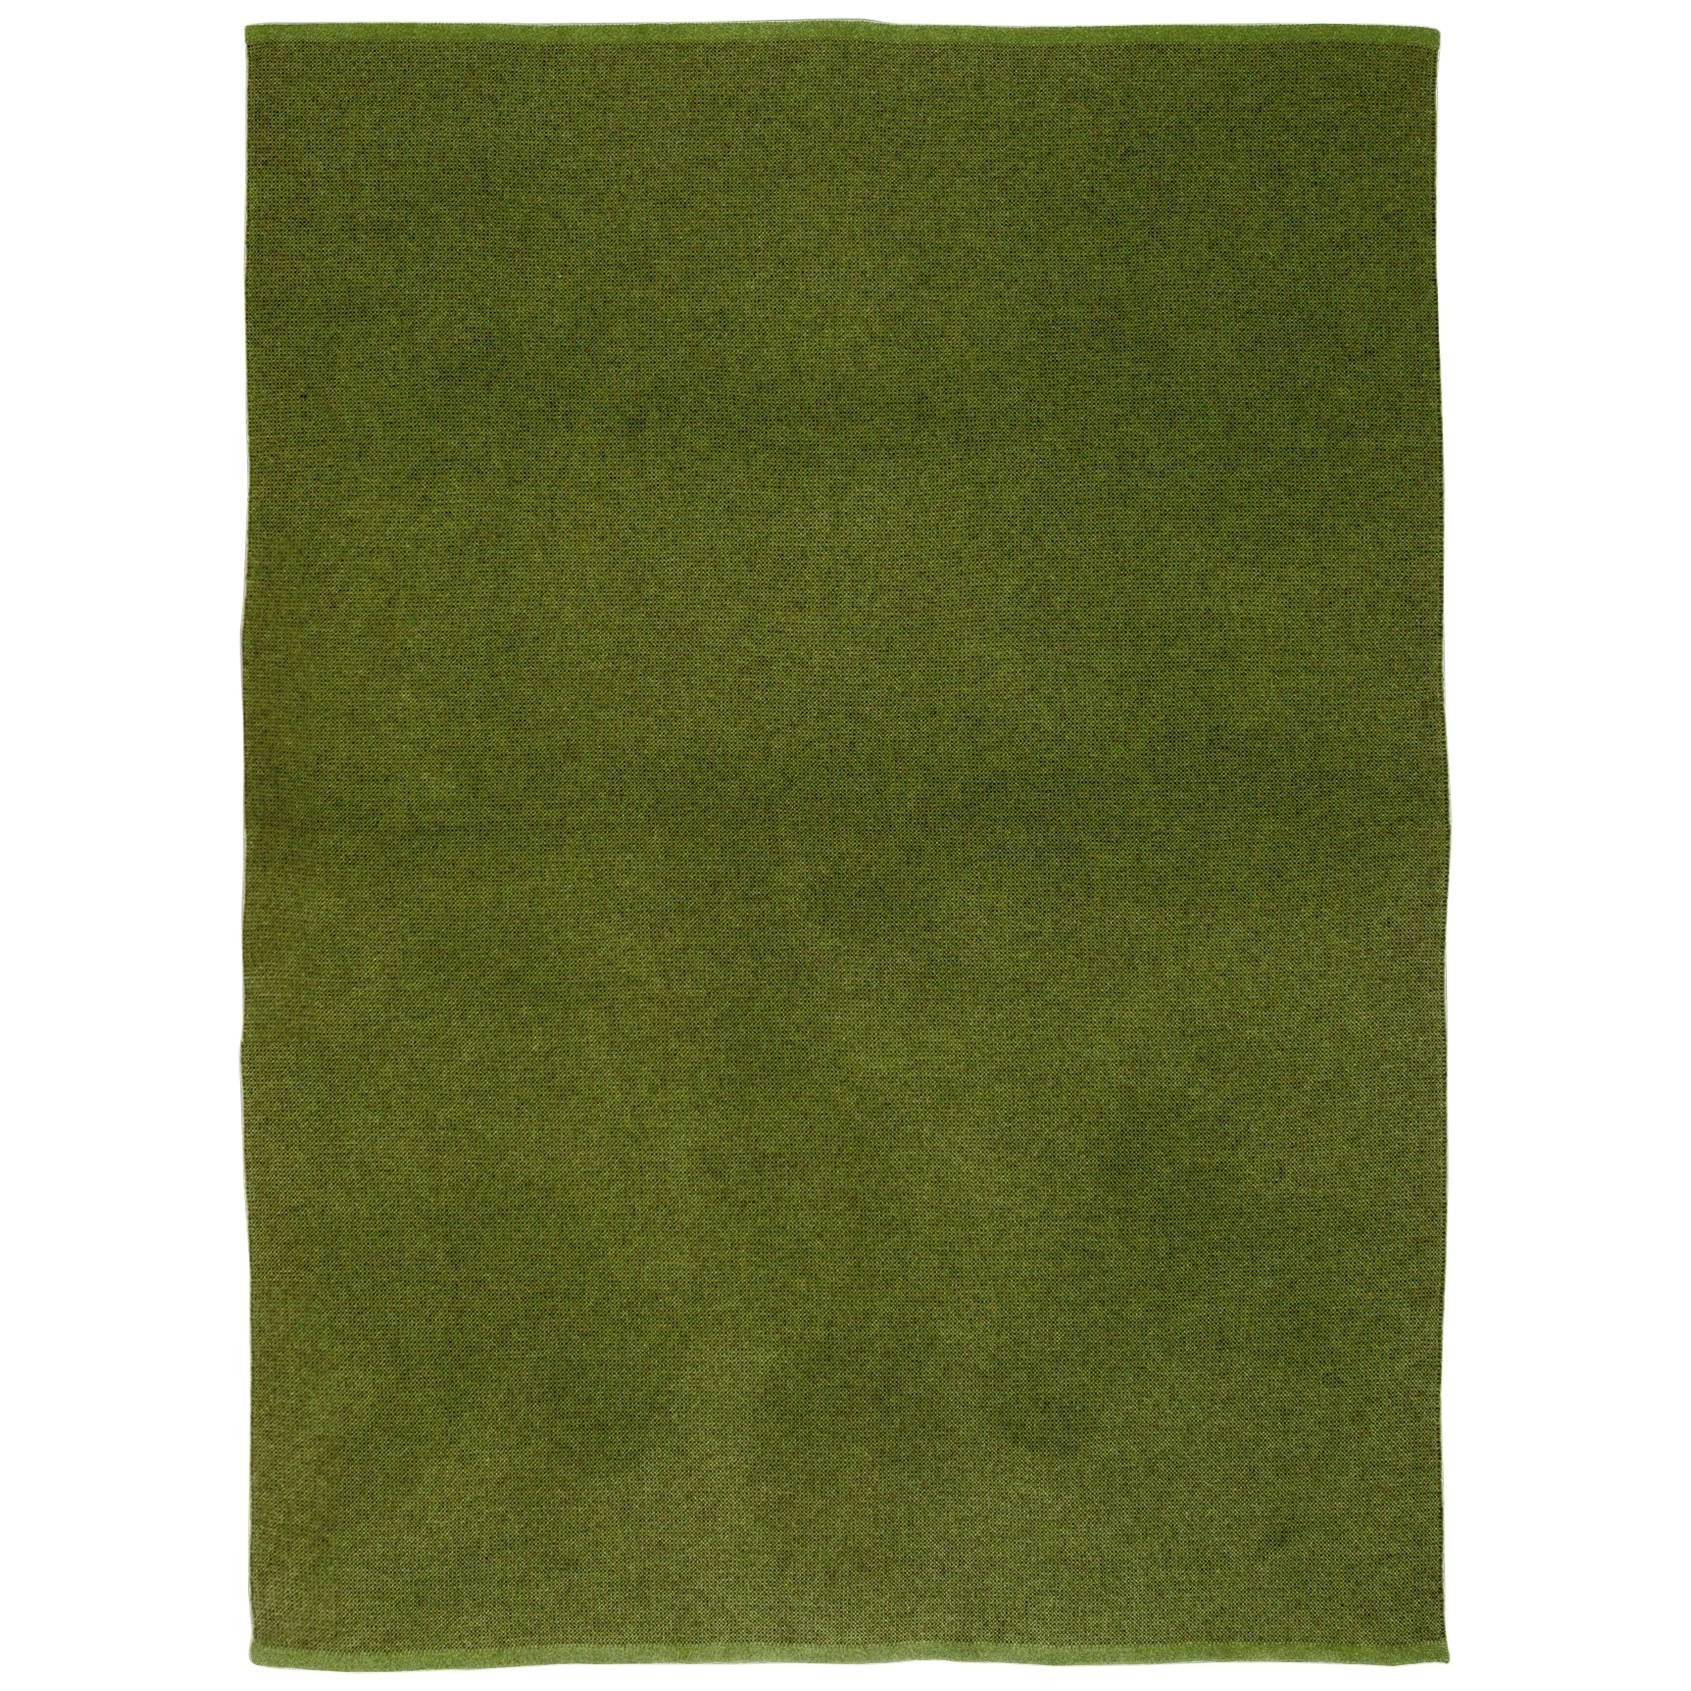 Moss Green Blanket by Saved, New York